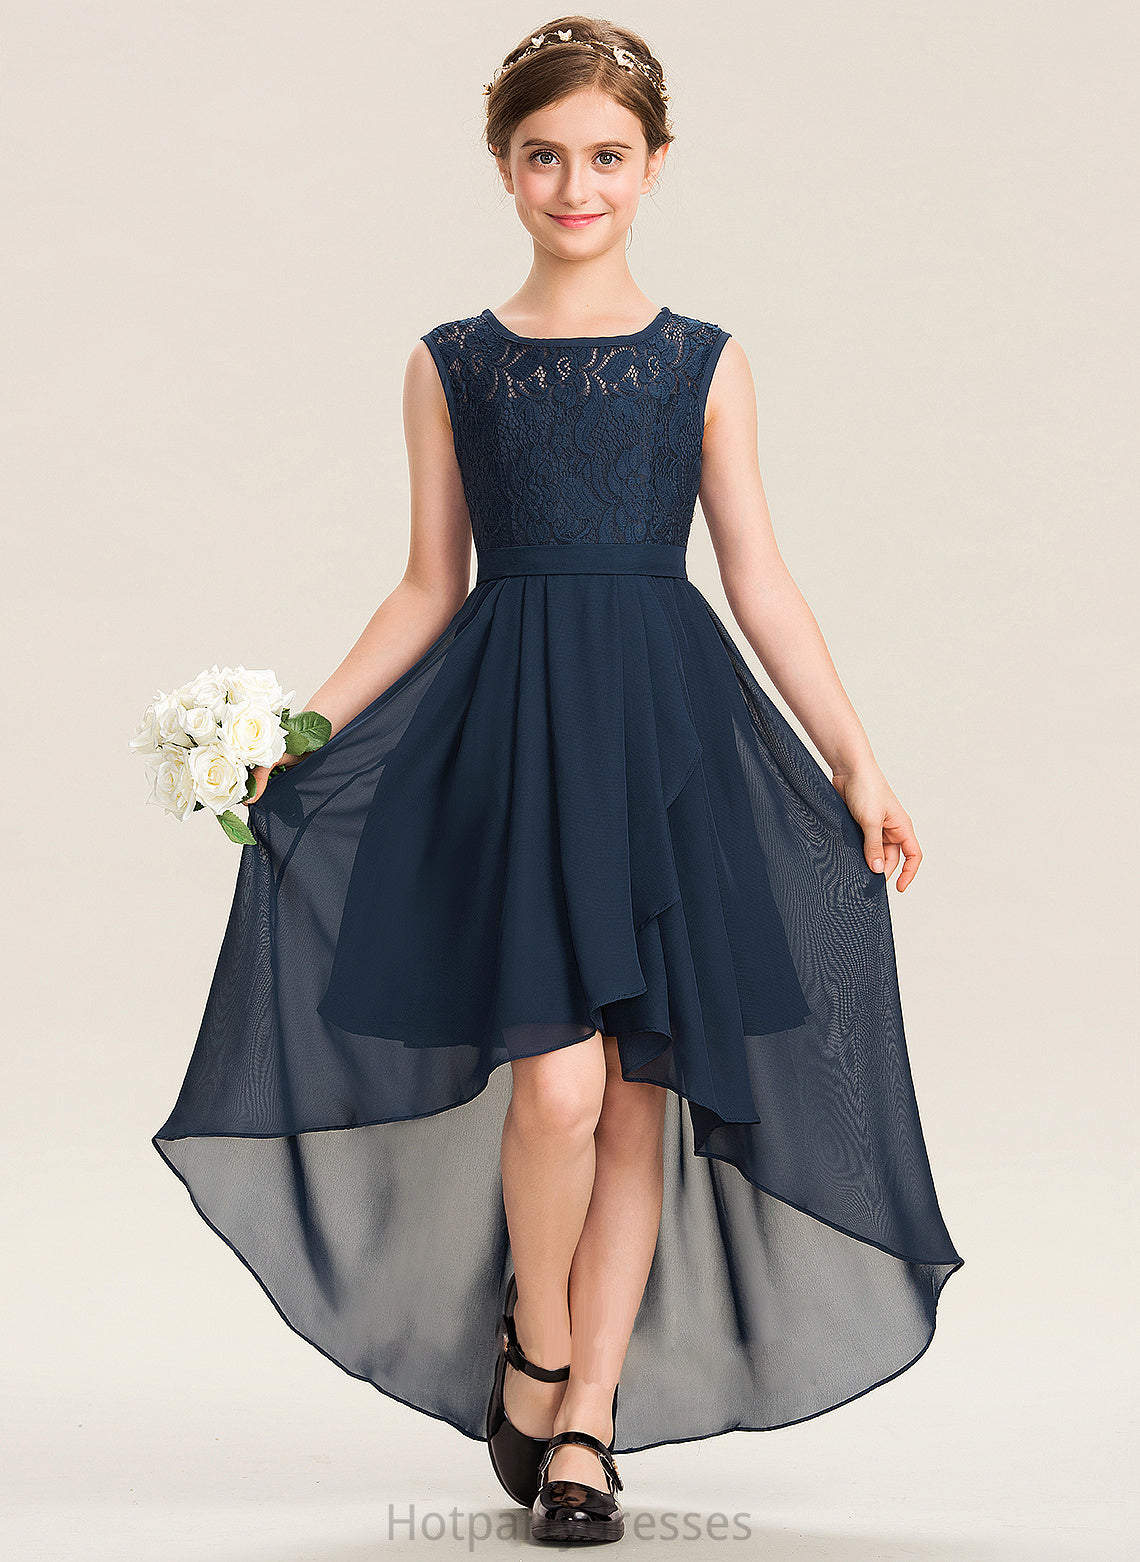 Bow(s) Lace Cascading With Chiffon Asymmetrical Ruffles Tess Scoop Junior Bridesmaid Dresses Neck A-Line